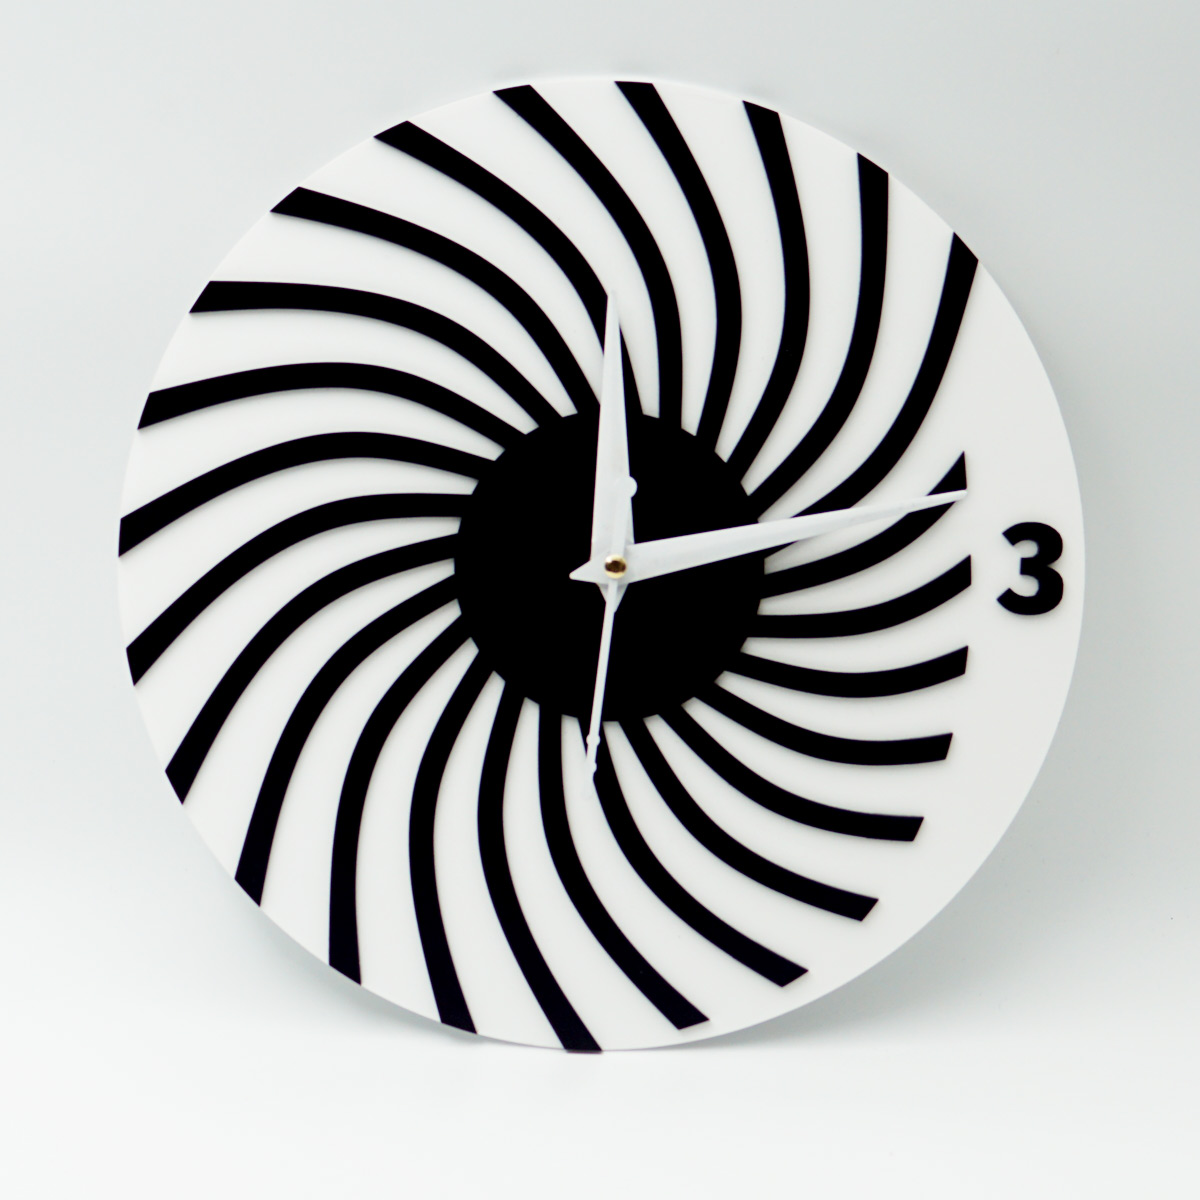 penhouse.in Customizable Acrylic White With Black Color Striped Design Wall Clock 250mm X 250mm SKU ACC046